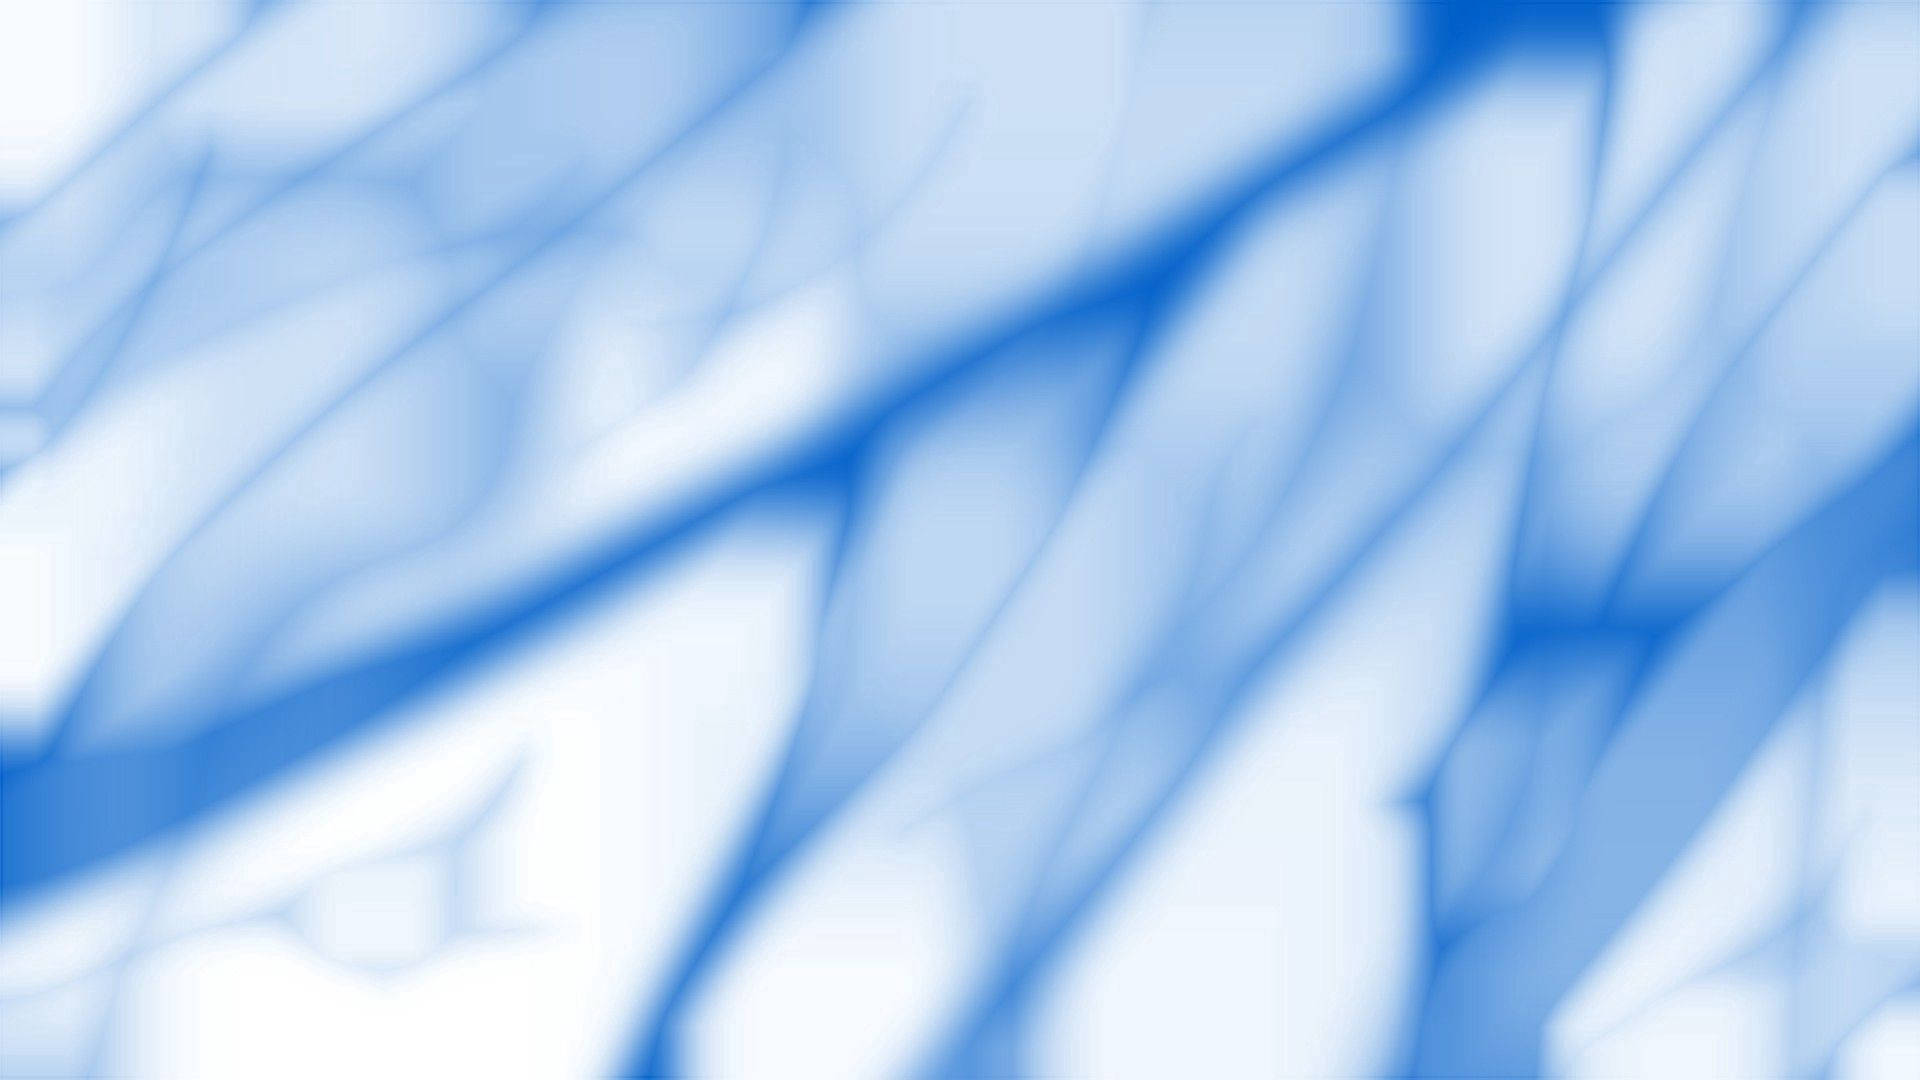 Blue And White Blurred Lines Background